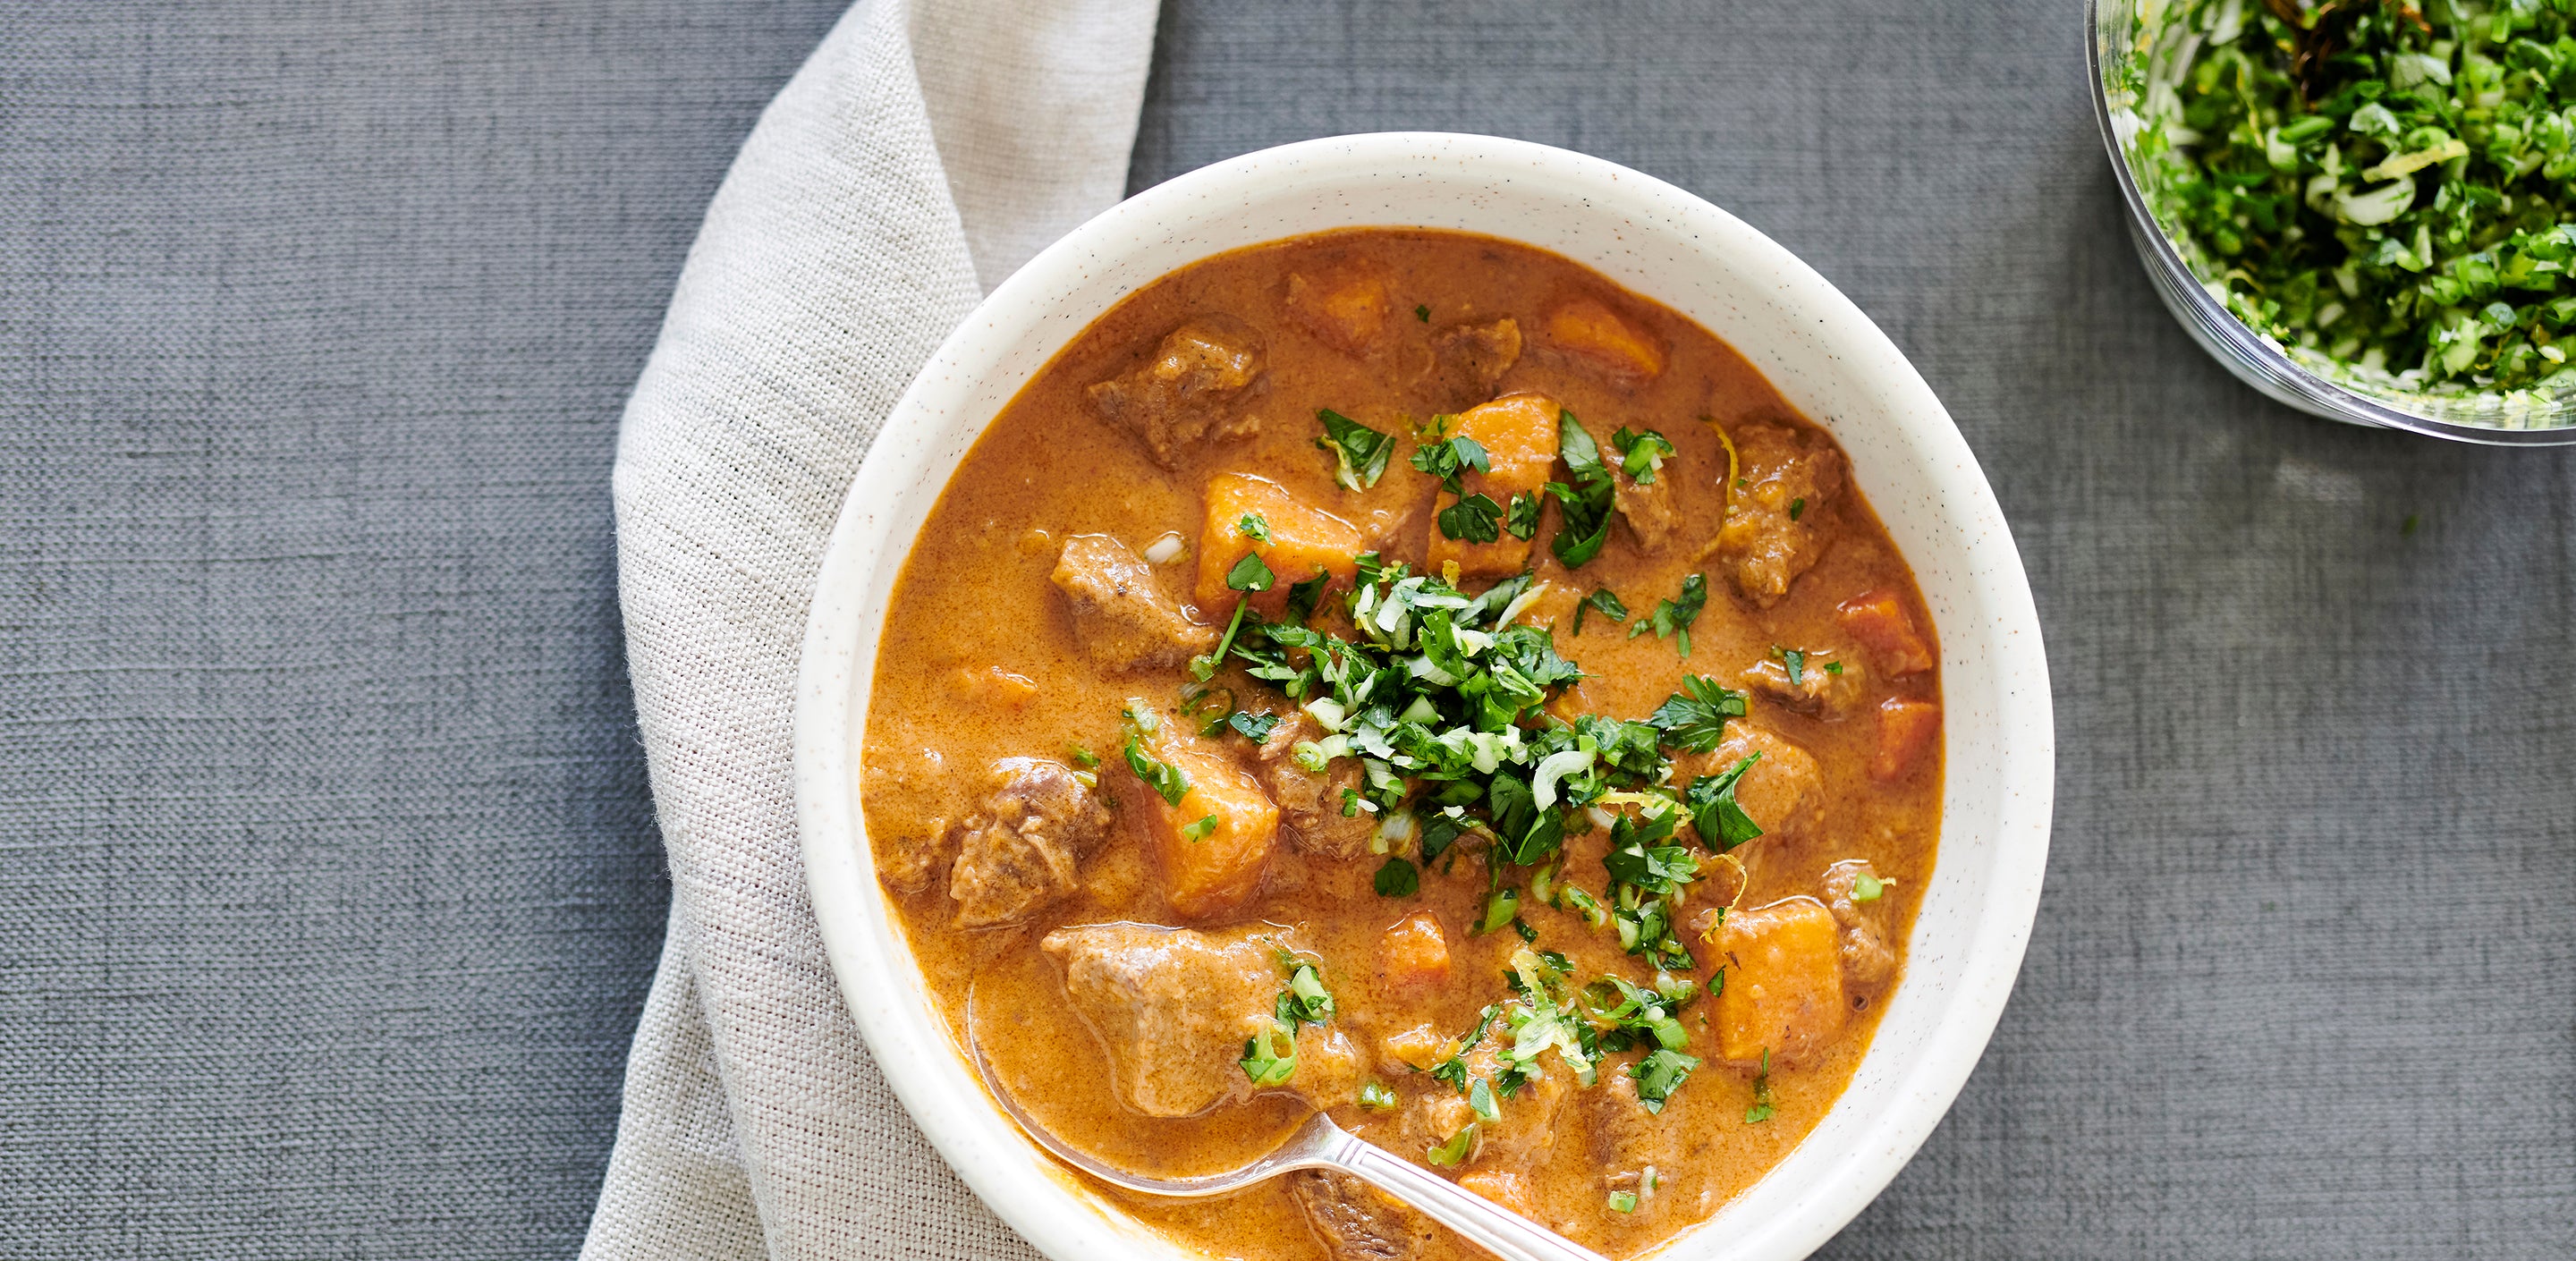 West African Lamb and Peanut Stew with Spicy Herb Topping